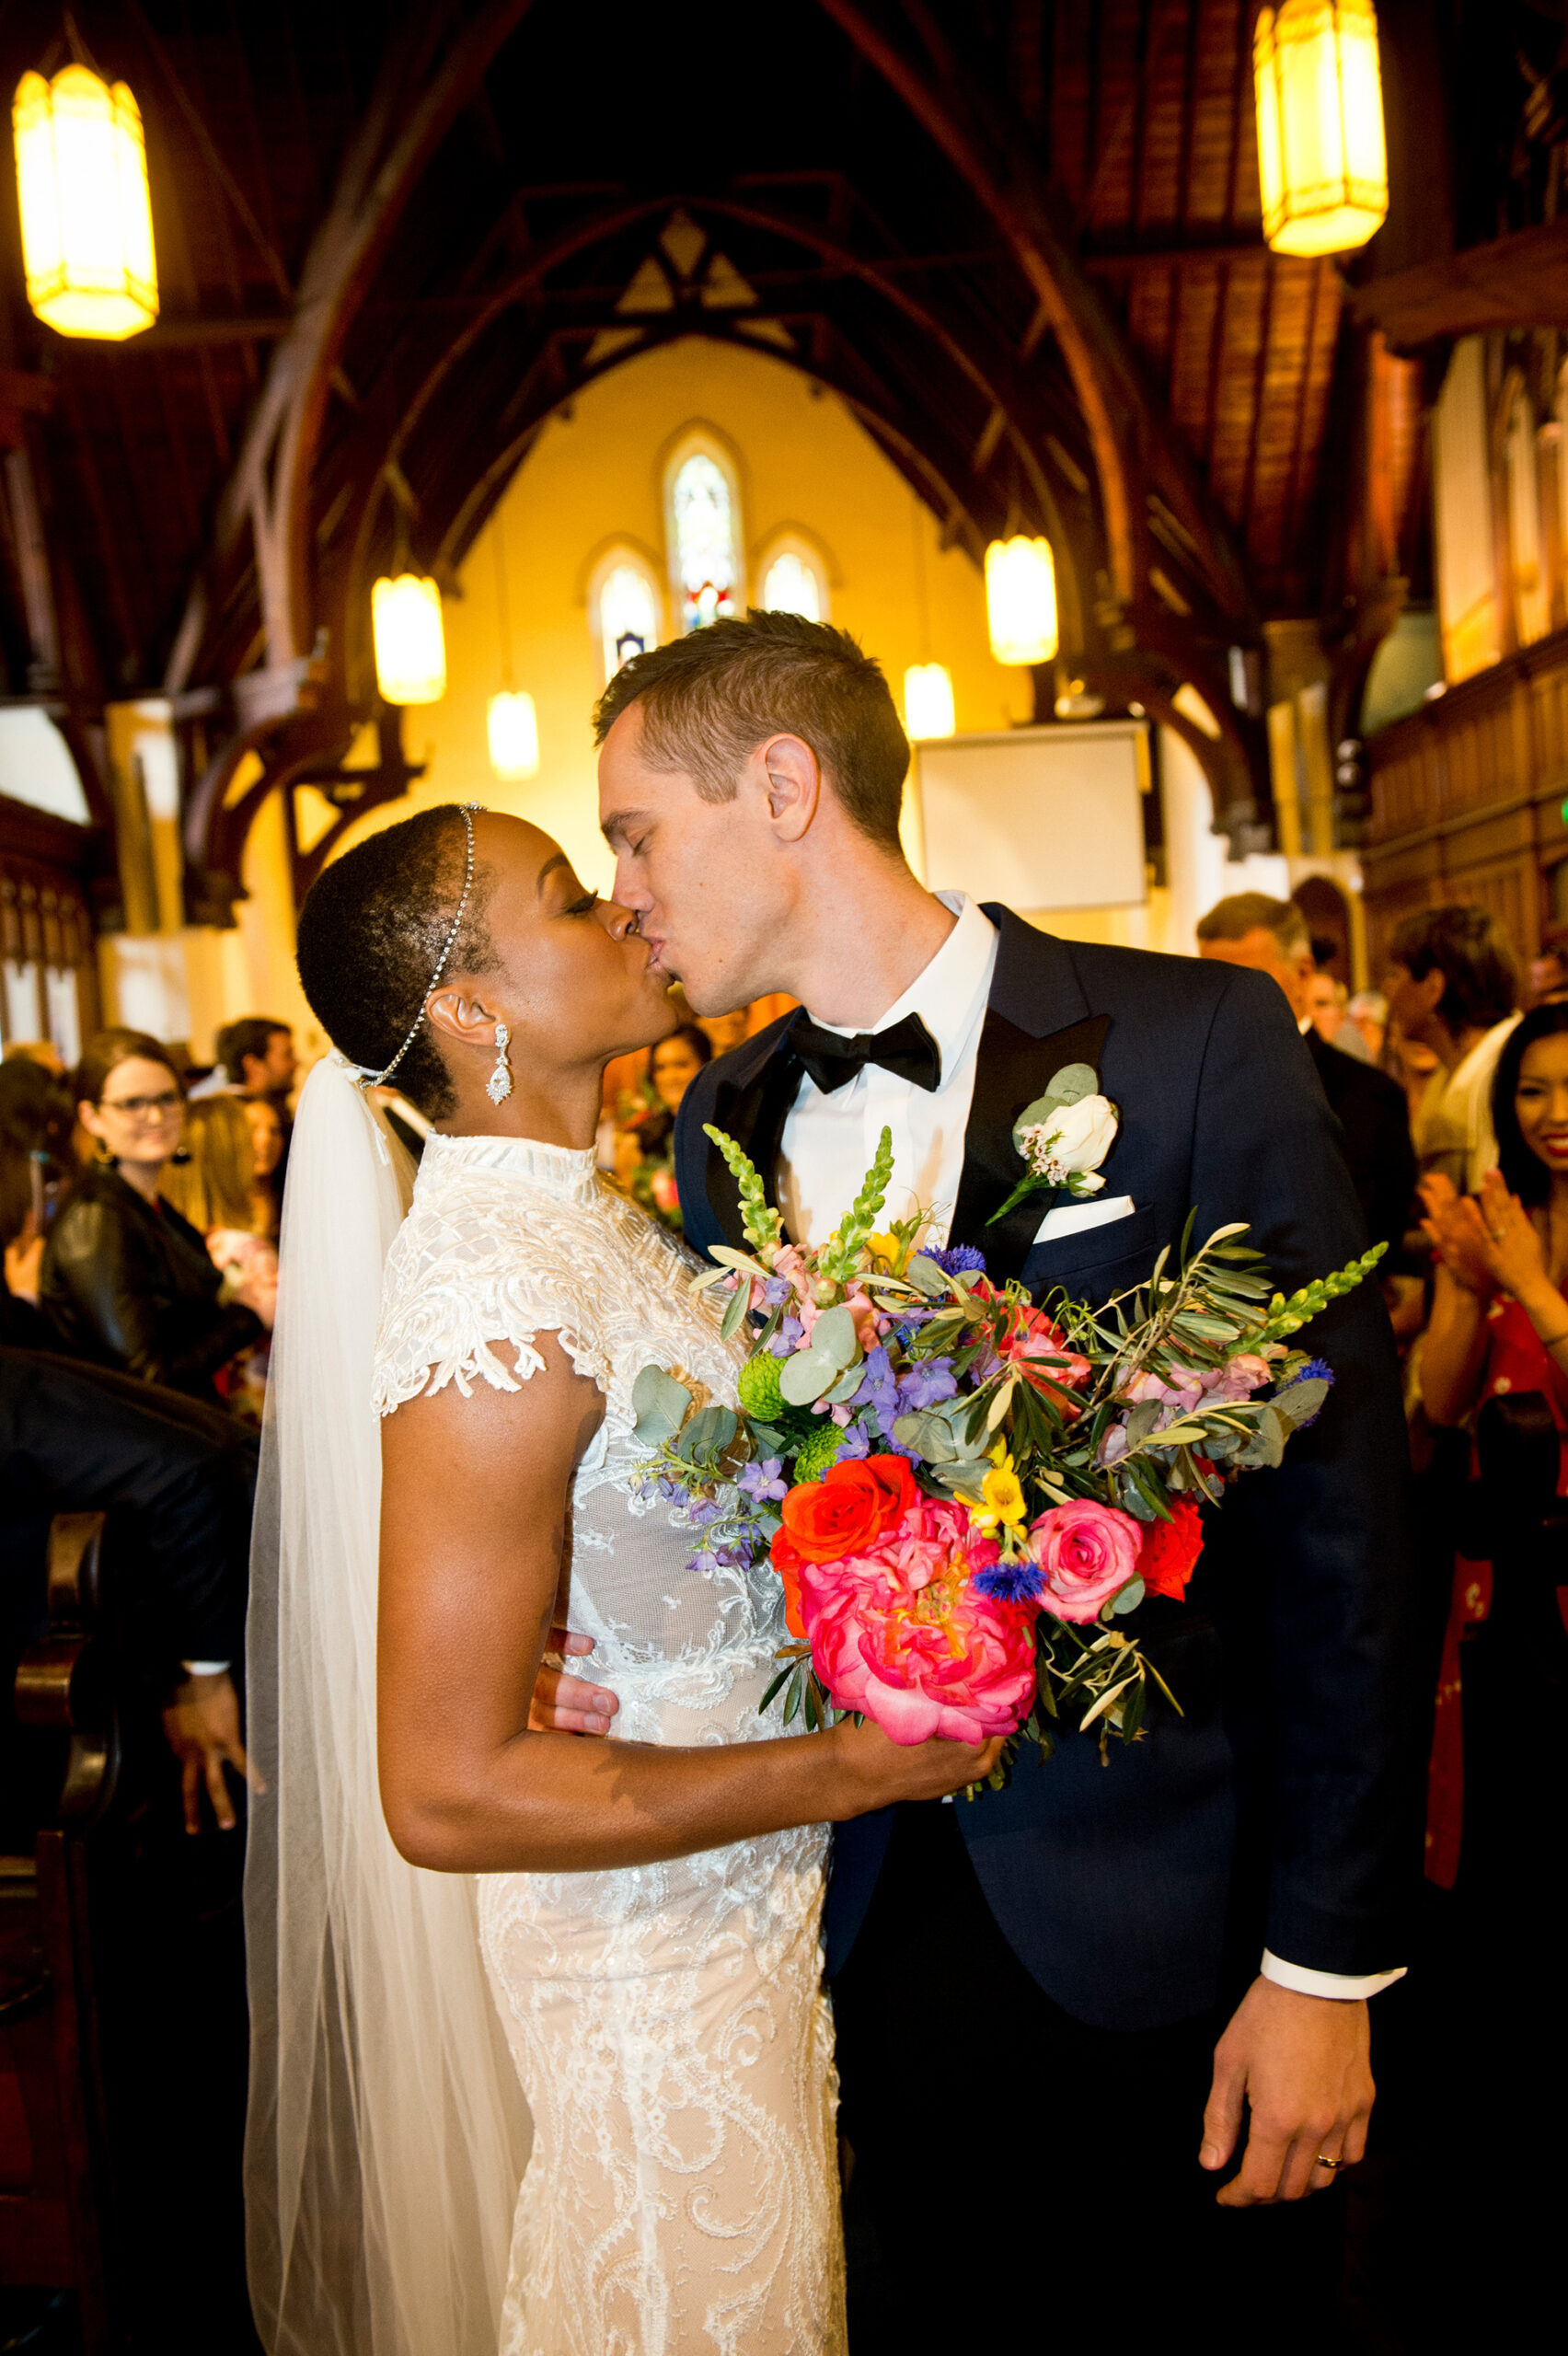 Nneka_Bill_Colorful-Cultural-Wedding_Chris-Clinnick-Photography_021